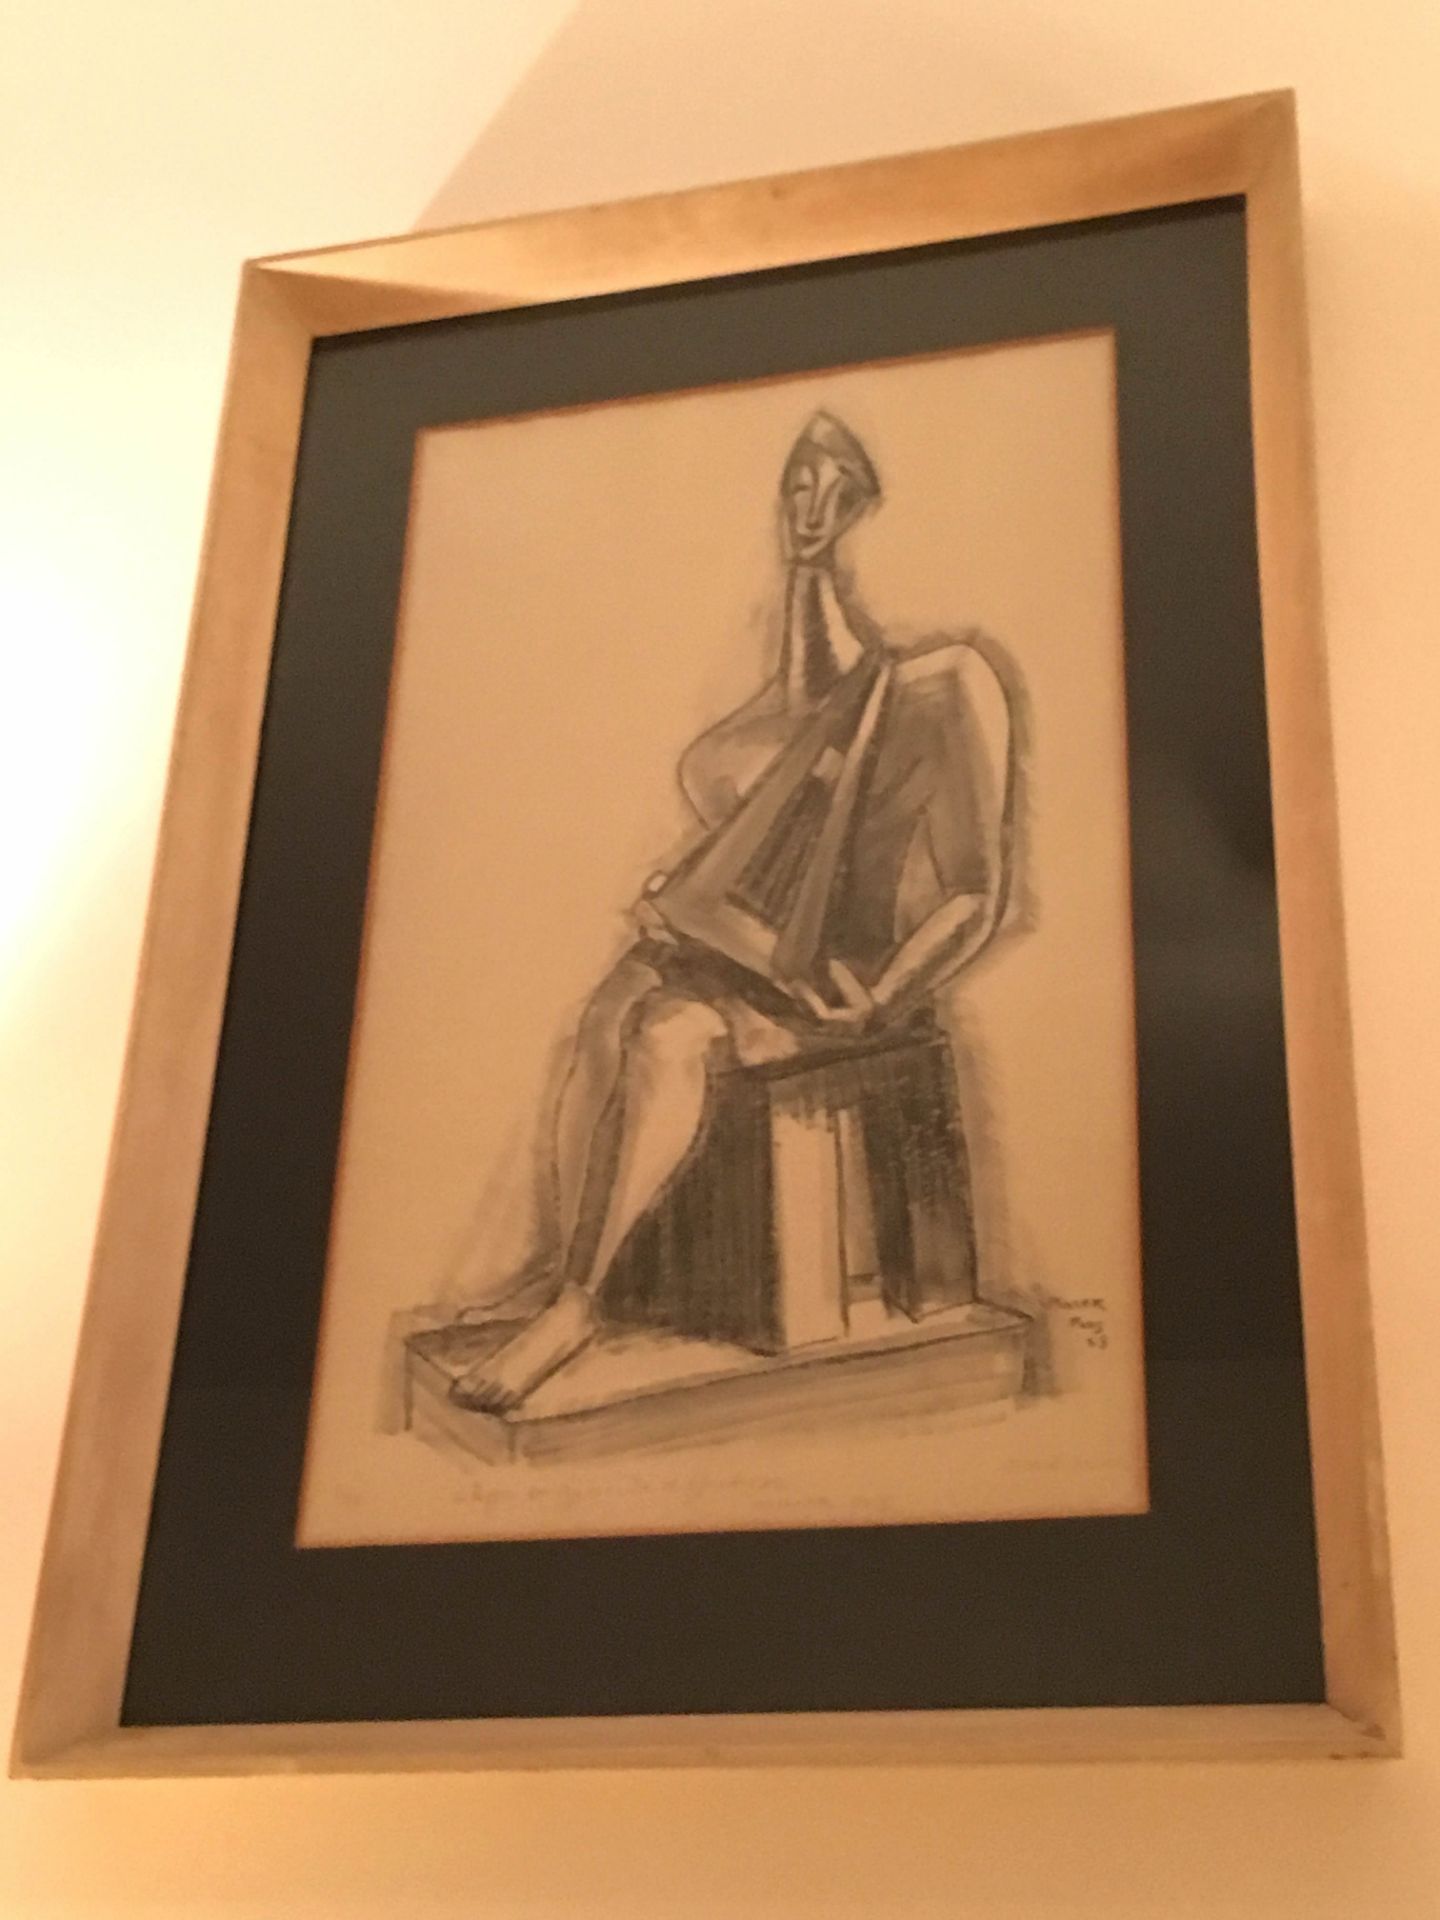 Seated figure with harp print 2/25. 84 x 58 cms, Condition: Good signed Marek Szwarc, March 1955, - Image 3 of 3